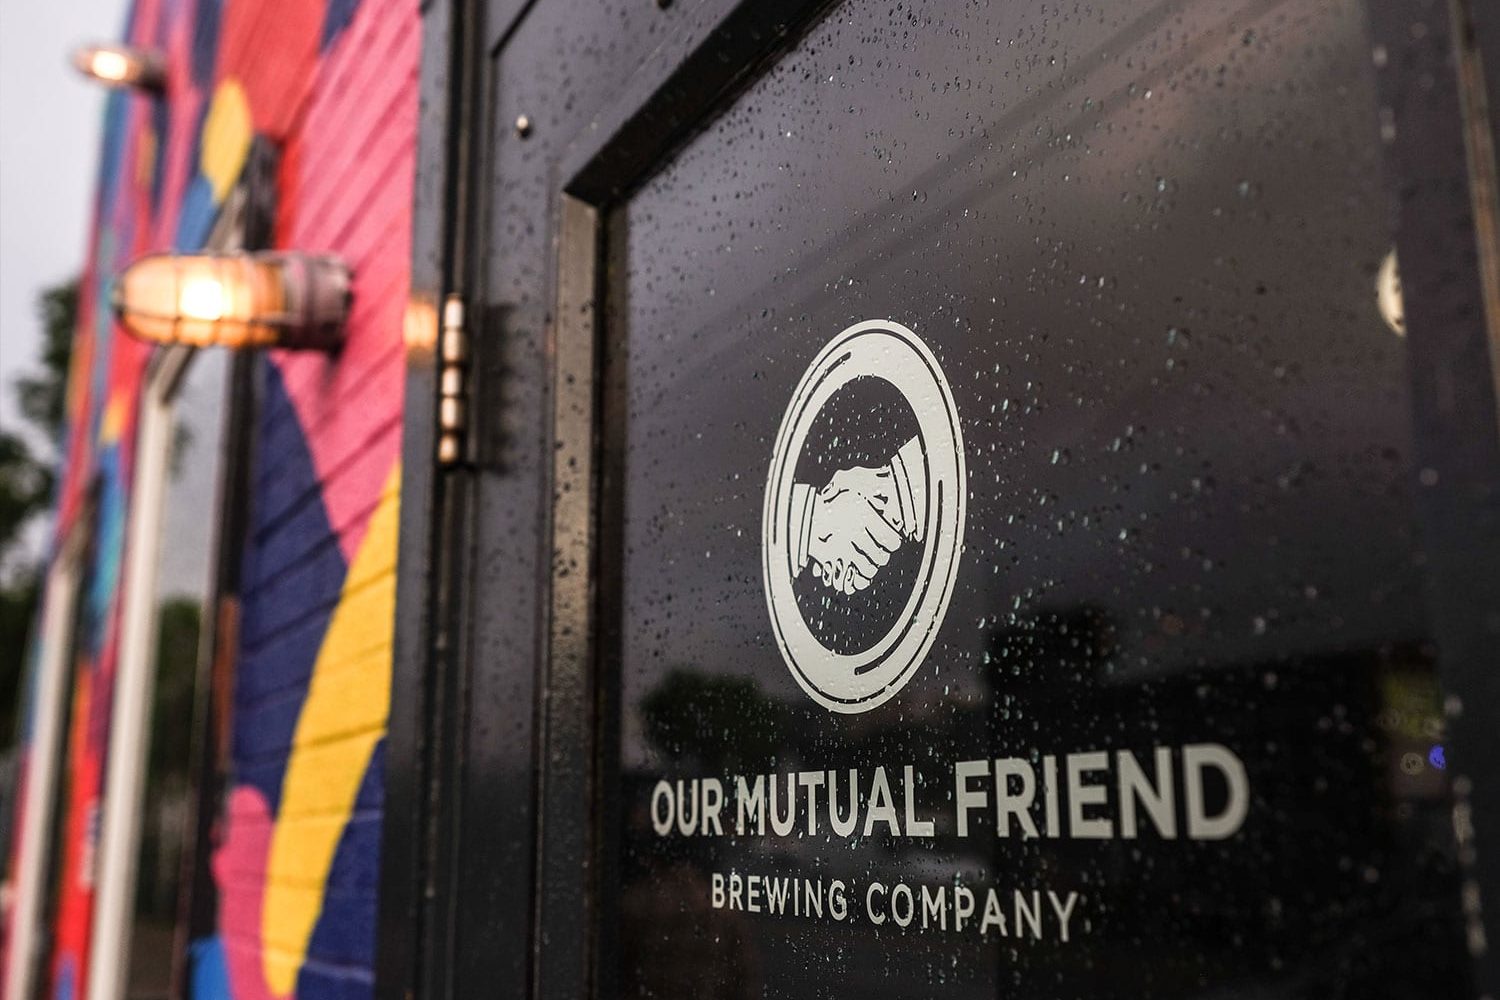 Our Mutual Friend Brewery